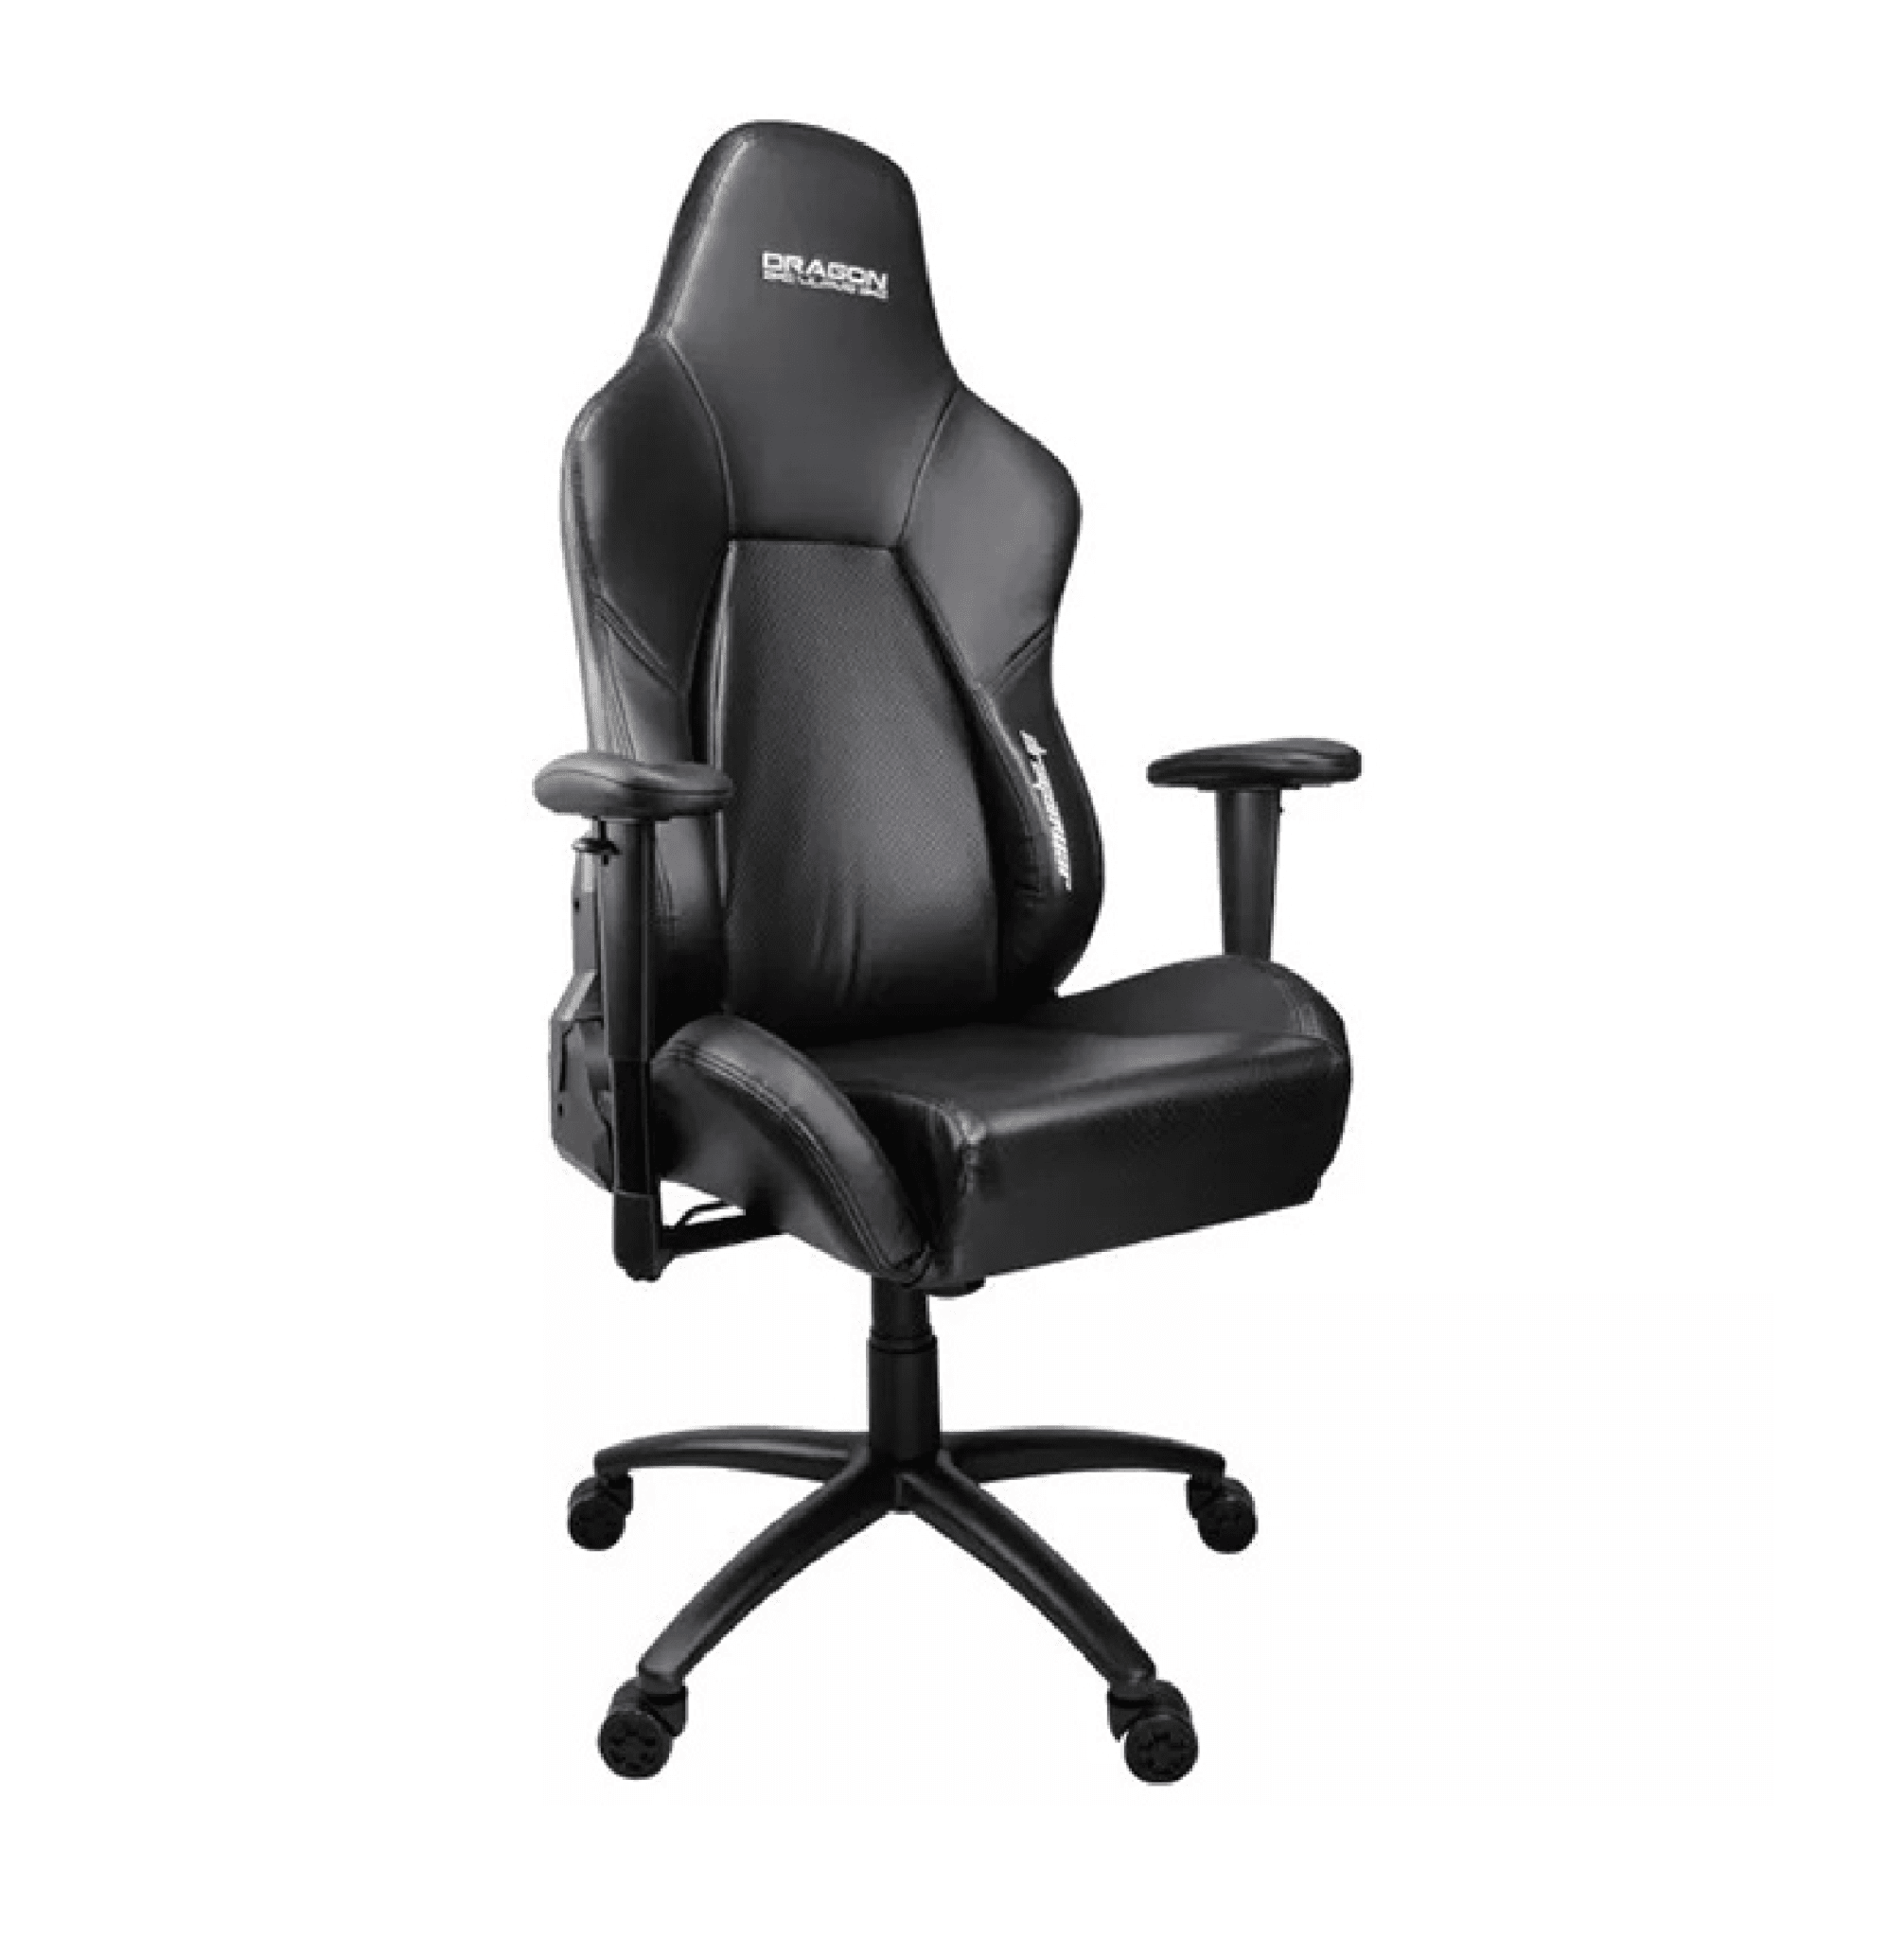 Dragon War GC-009 Gaming Chair w/ Foot Rest - Store 974 | ستور ٩٧٤